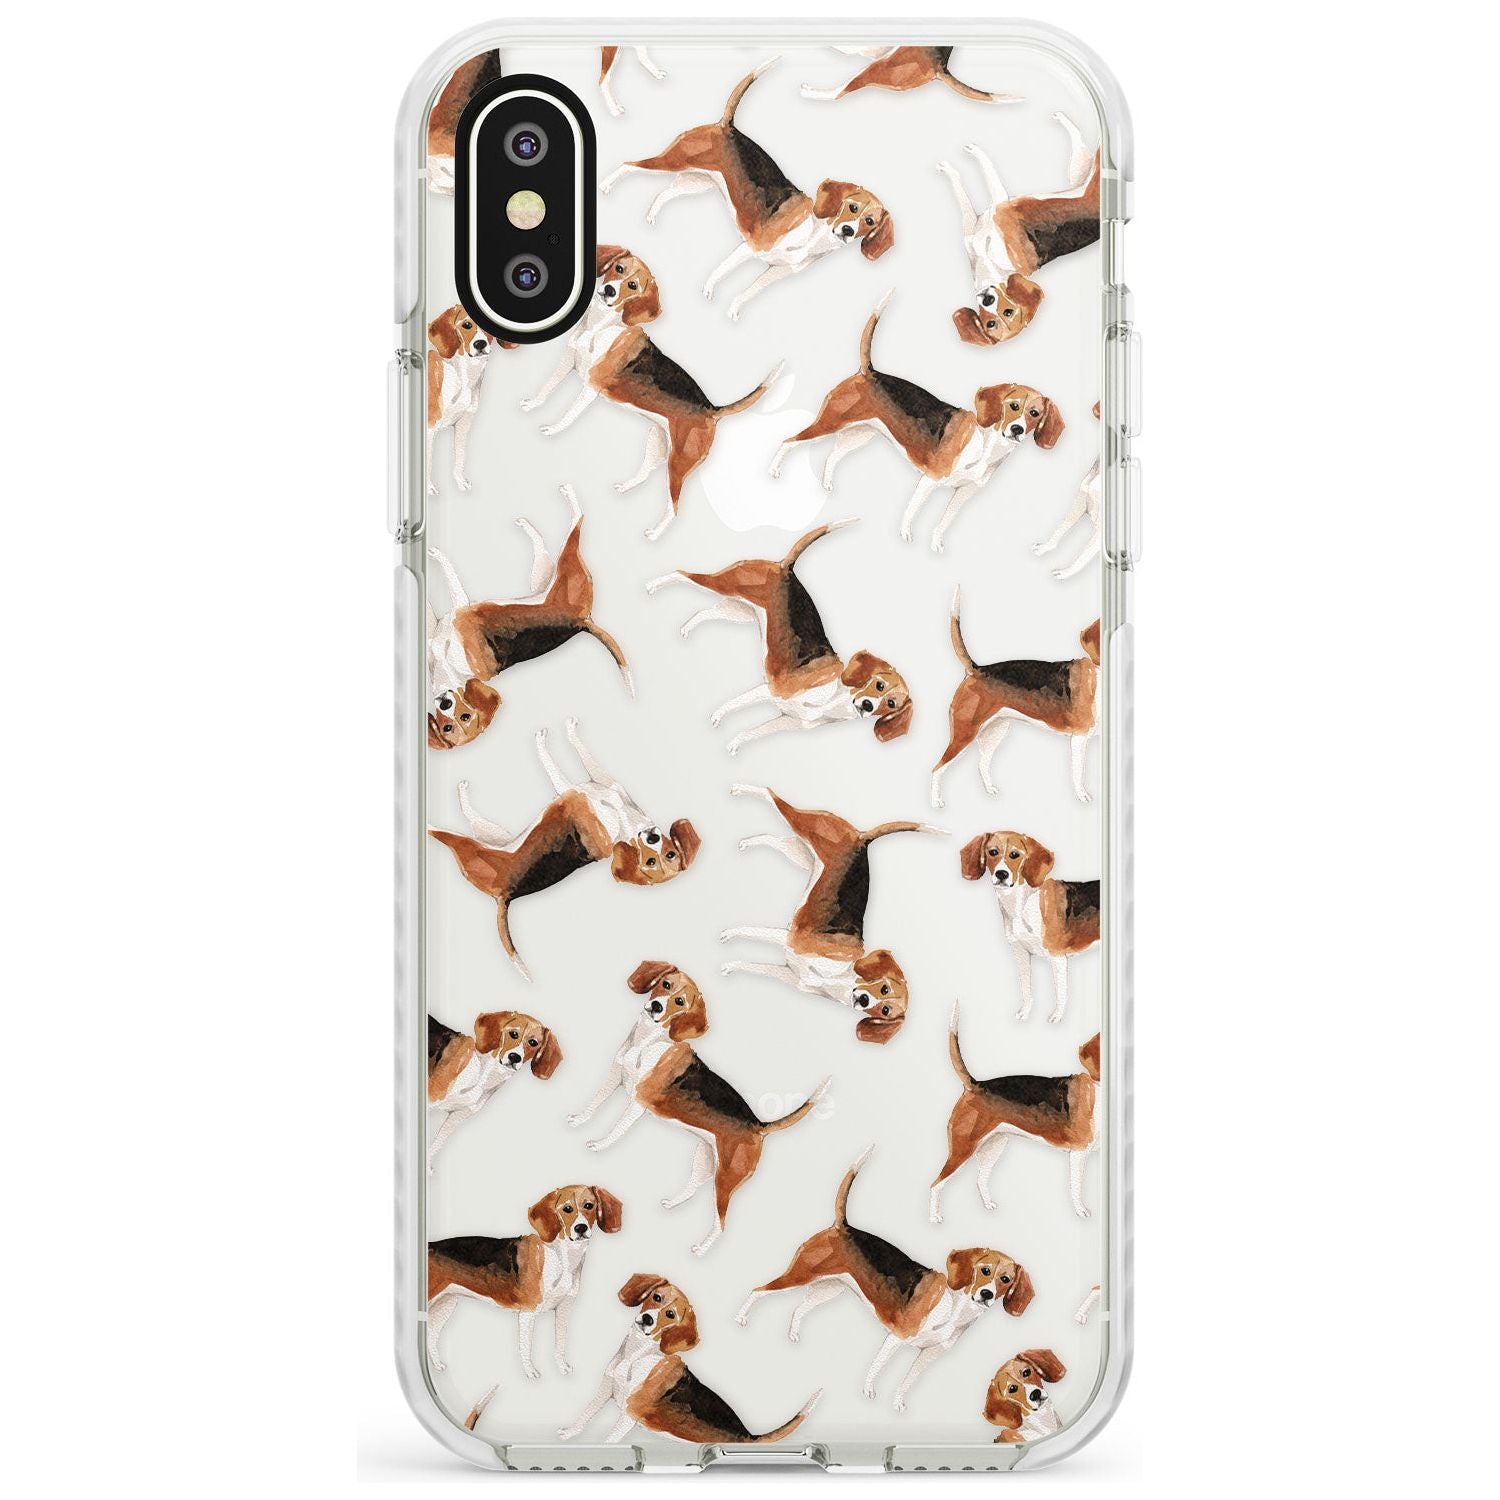 Beagle Watercolour Dog Pattern Impact Phone Case for iPhone X XS Max XR